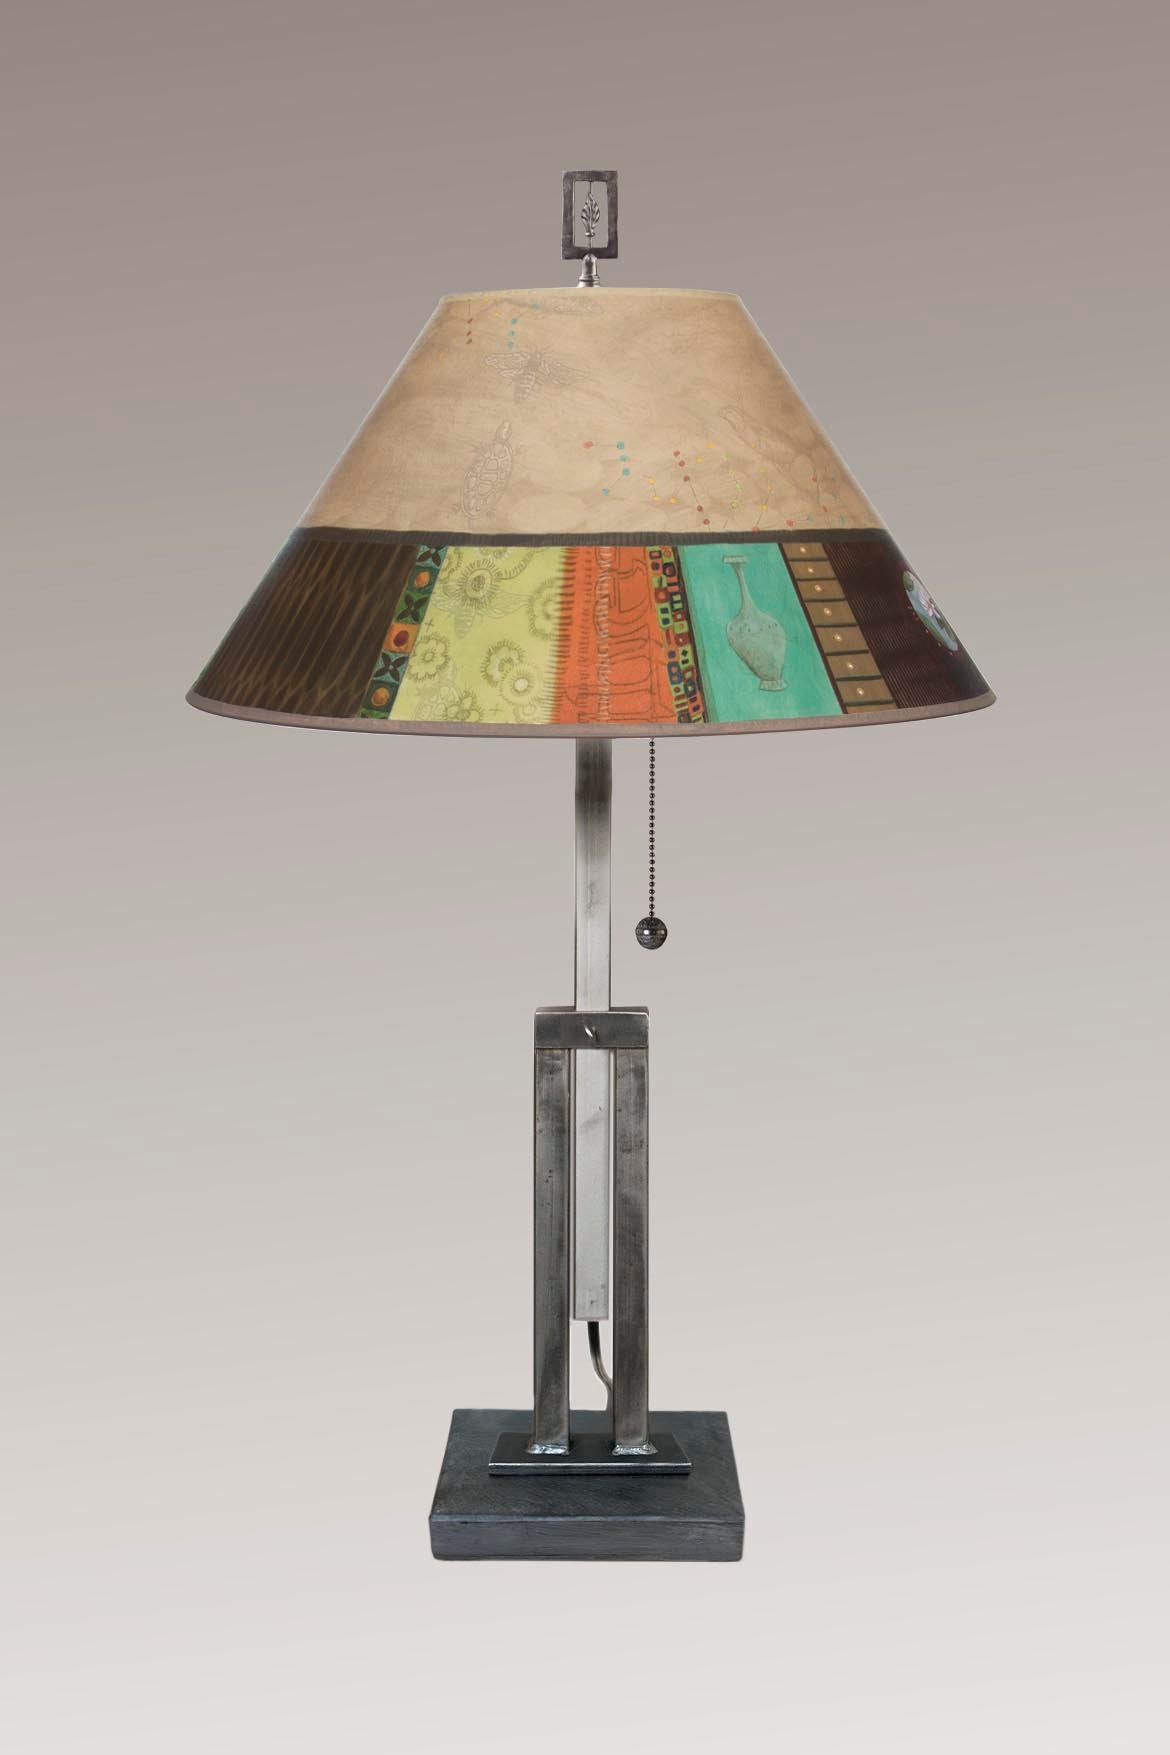 Janna Ugone &amp; Co Table Lamp Adjustable-Height Steel Table Lamp with Large Drum Shade in Linen Match